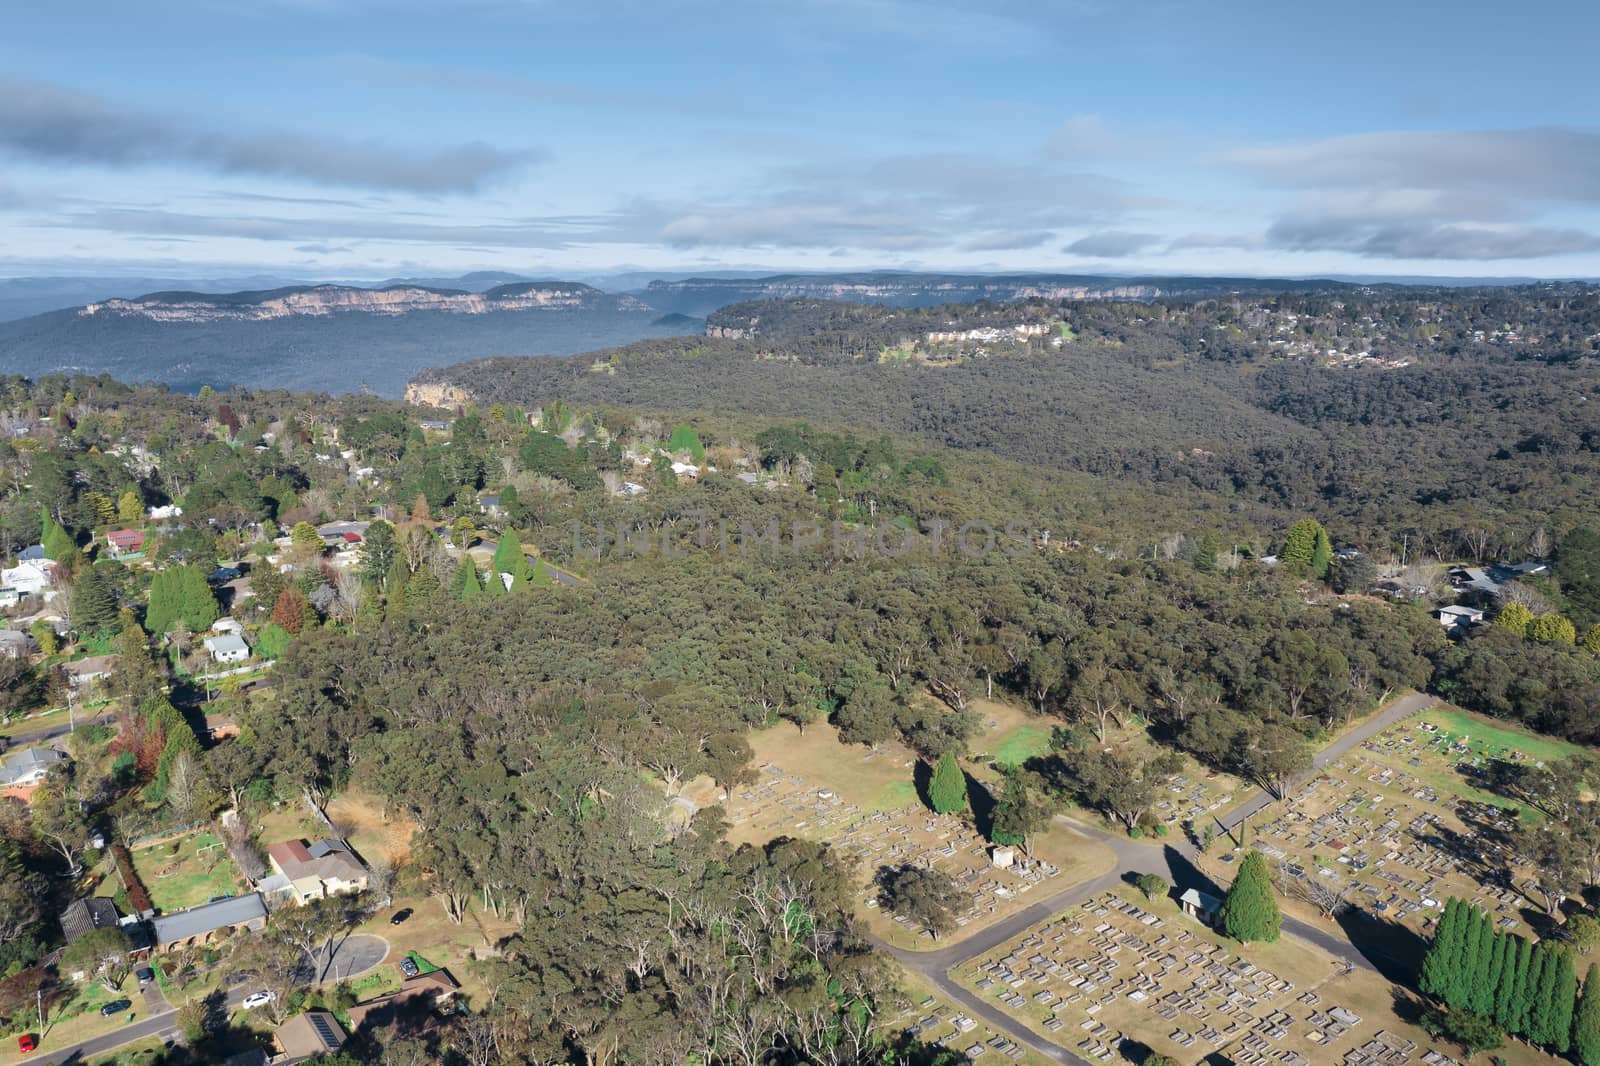 Aerial view of Wentworth Falls in The Blue Mountains by WittkePhotos